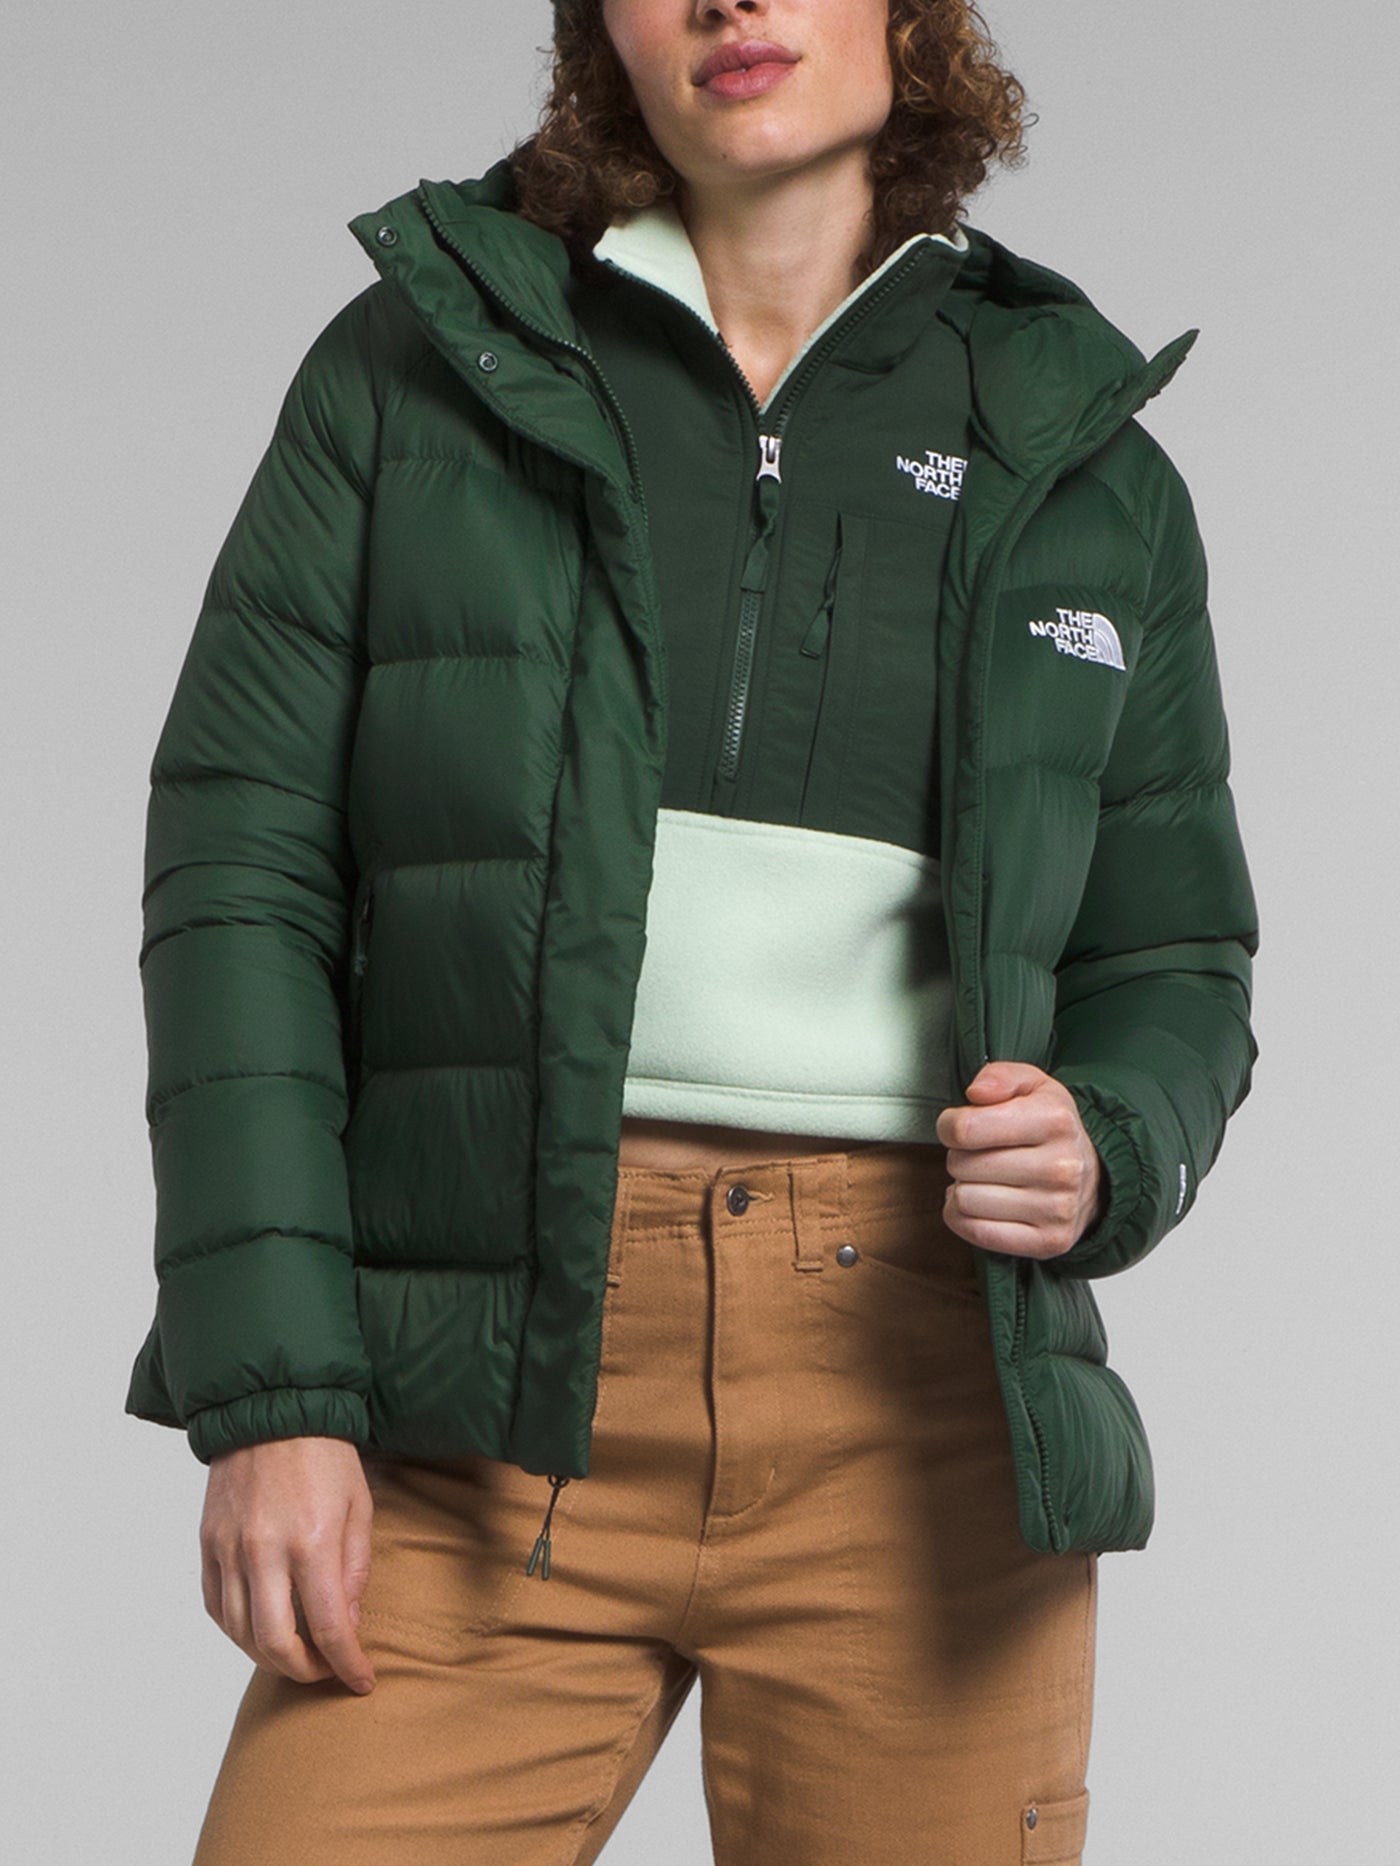 The North Face Manteau Hydrenalite Down Hoodie Femme – Oberson